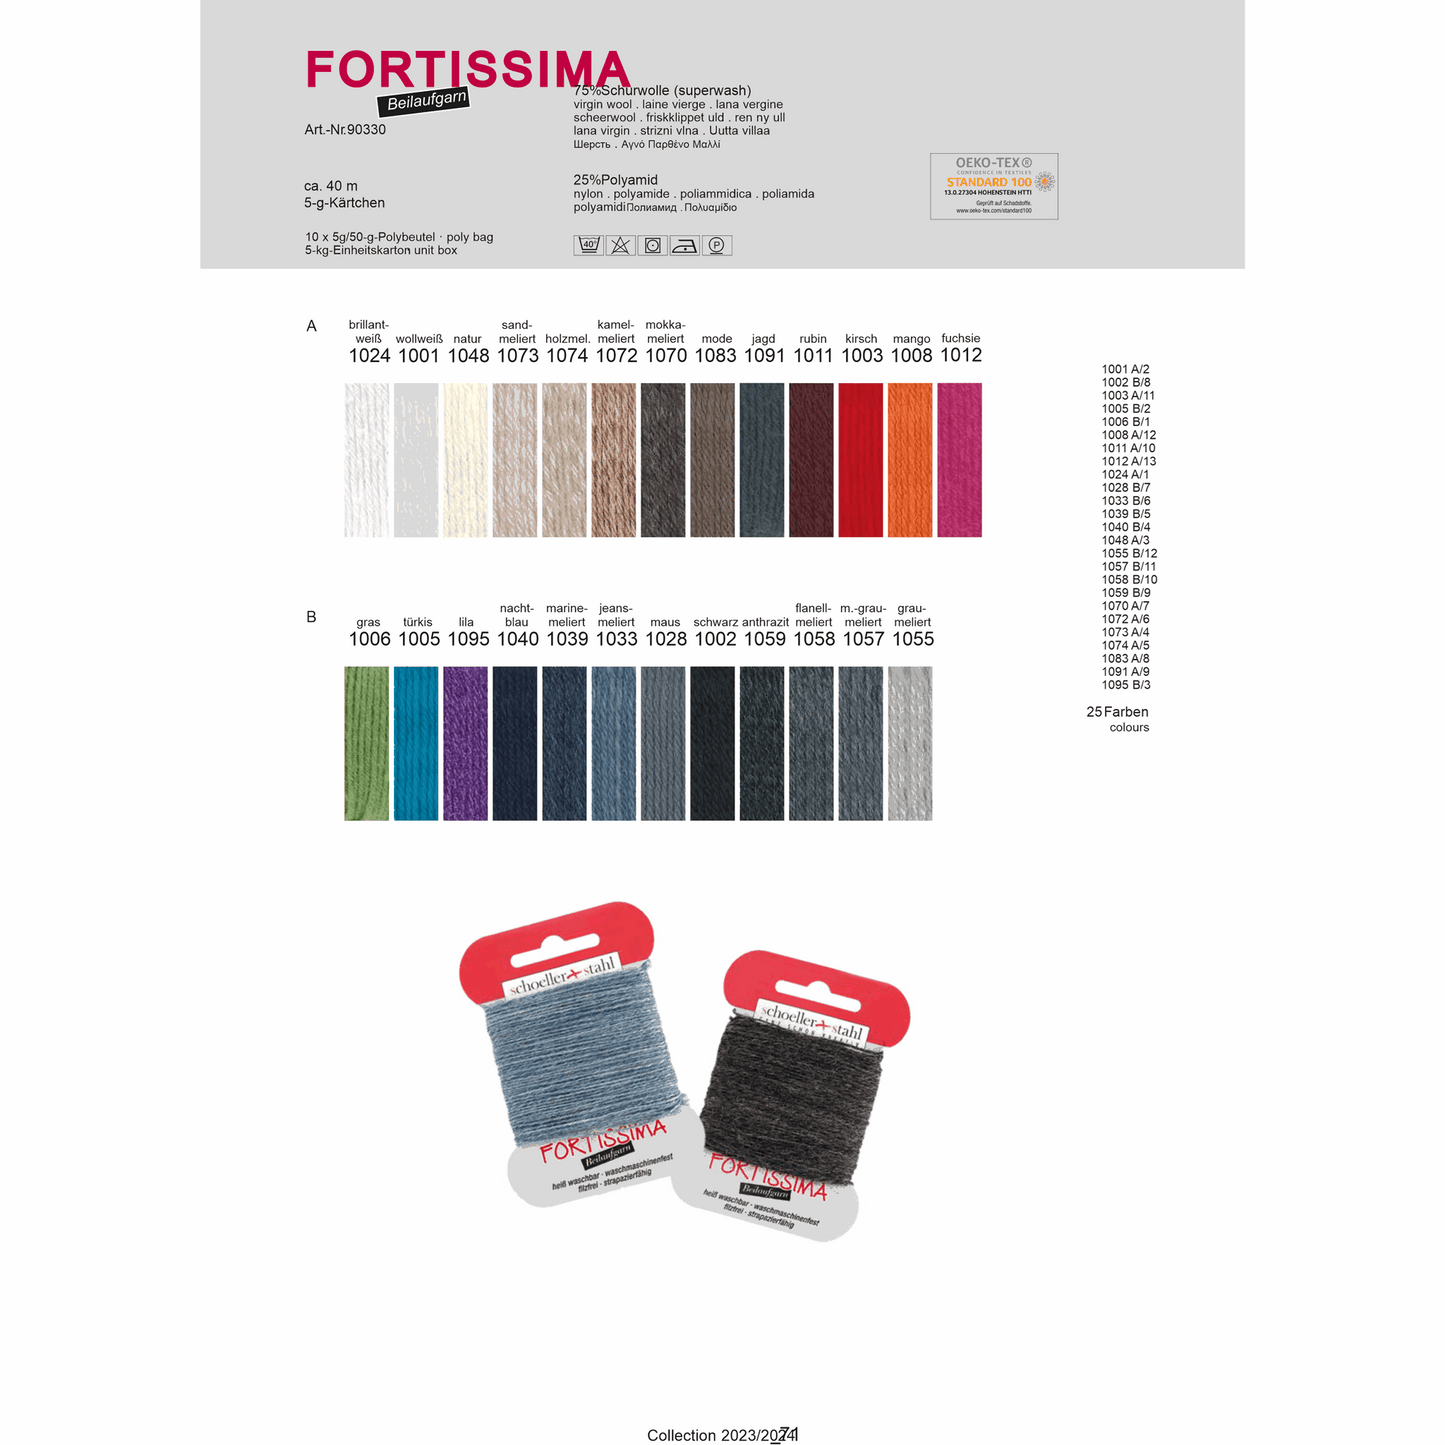 Fortissima thread 5g, 90330, color 1028, mouse gray